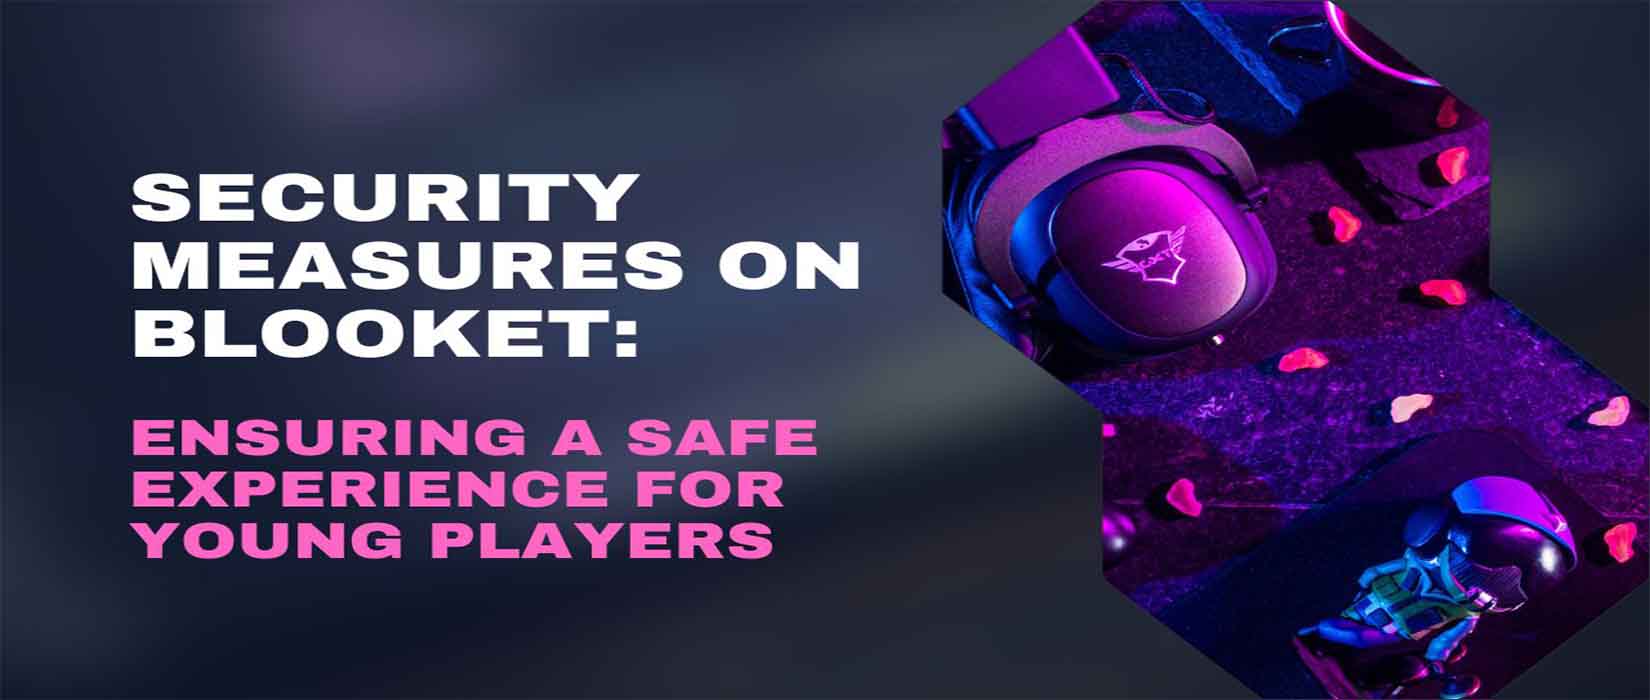 Security Measures on Blooket: Ensuring a Safe Experience for Young Players